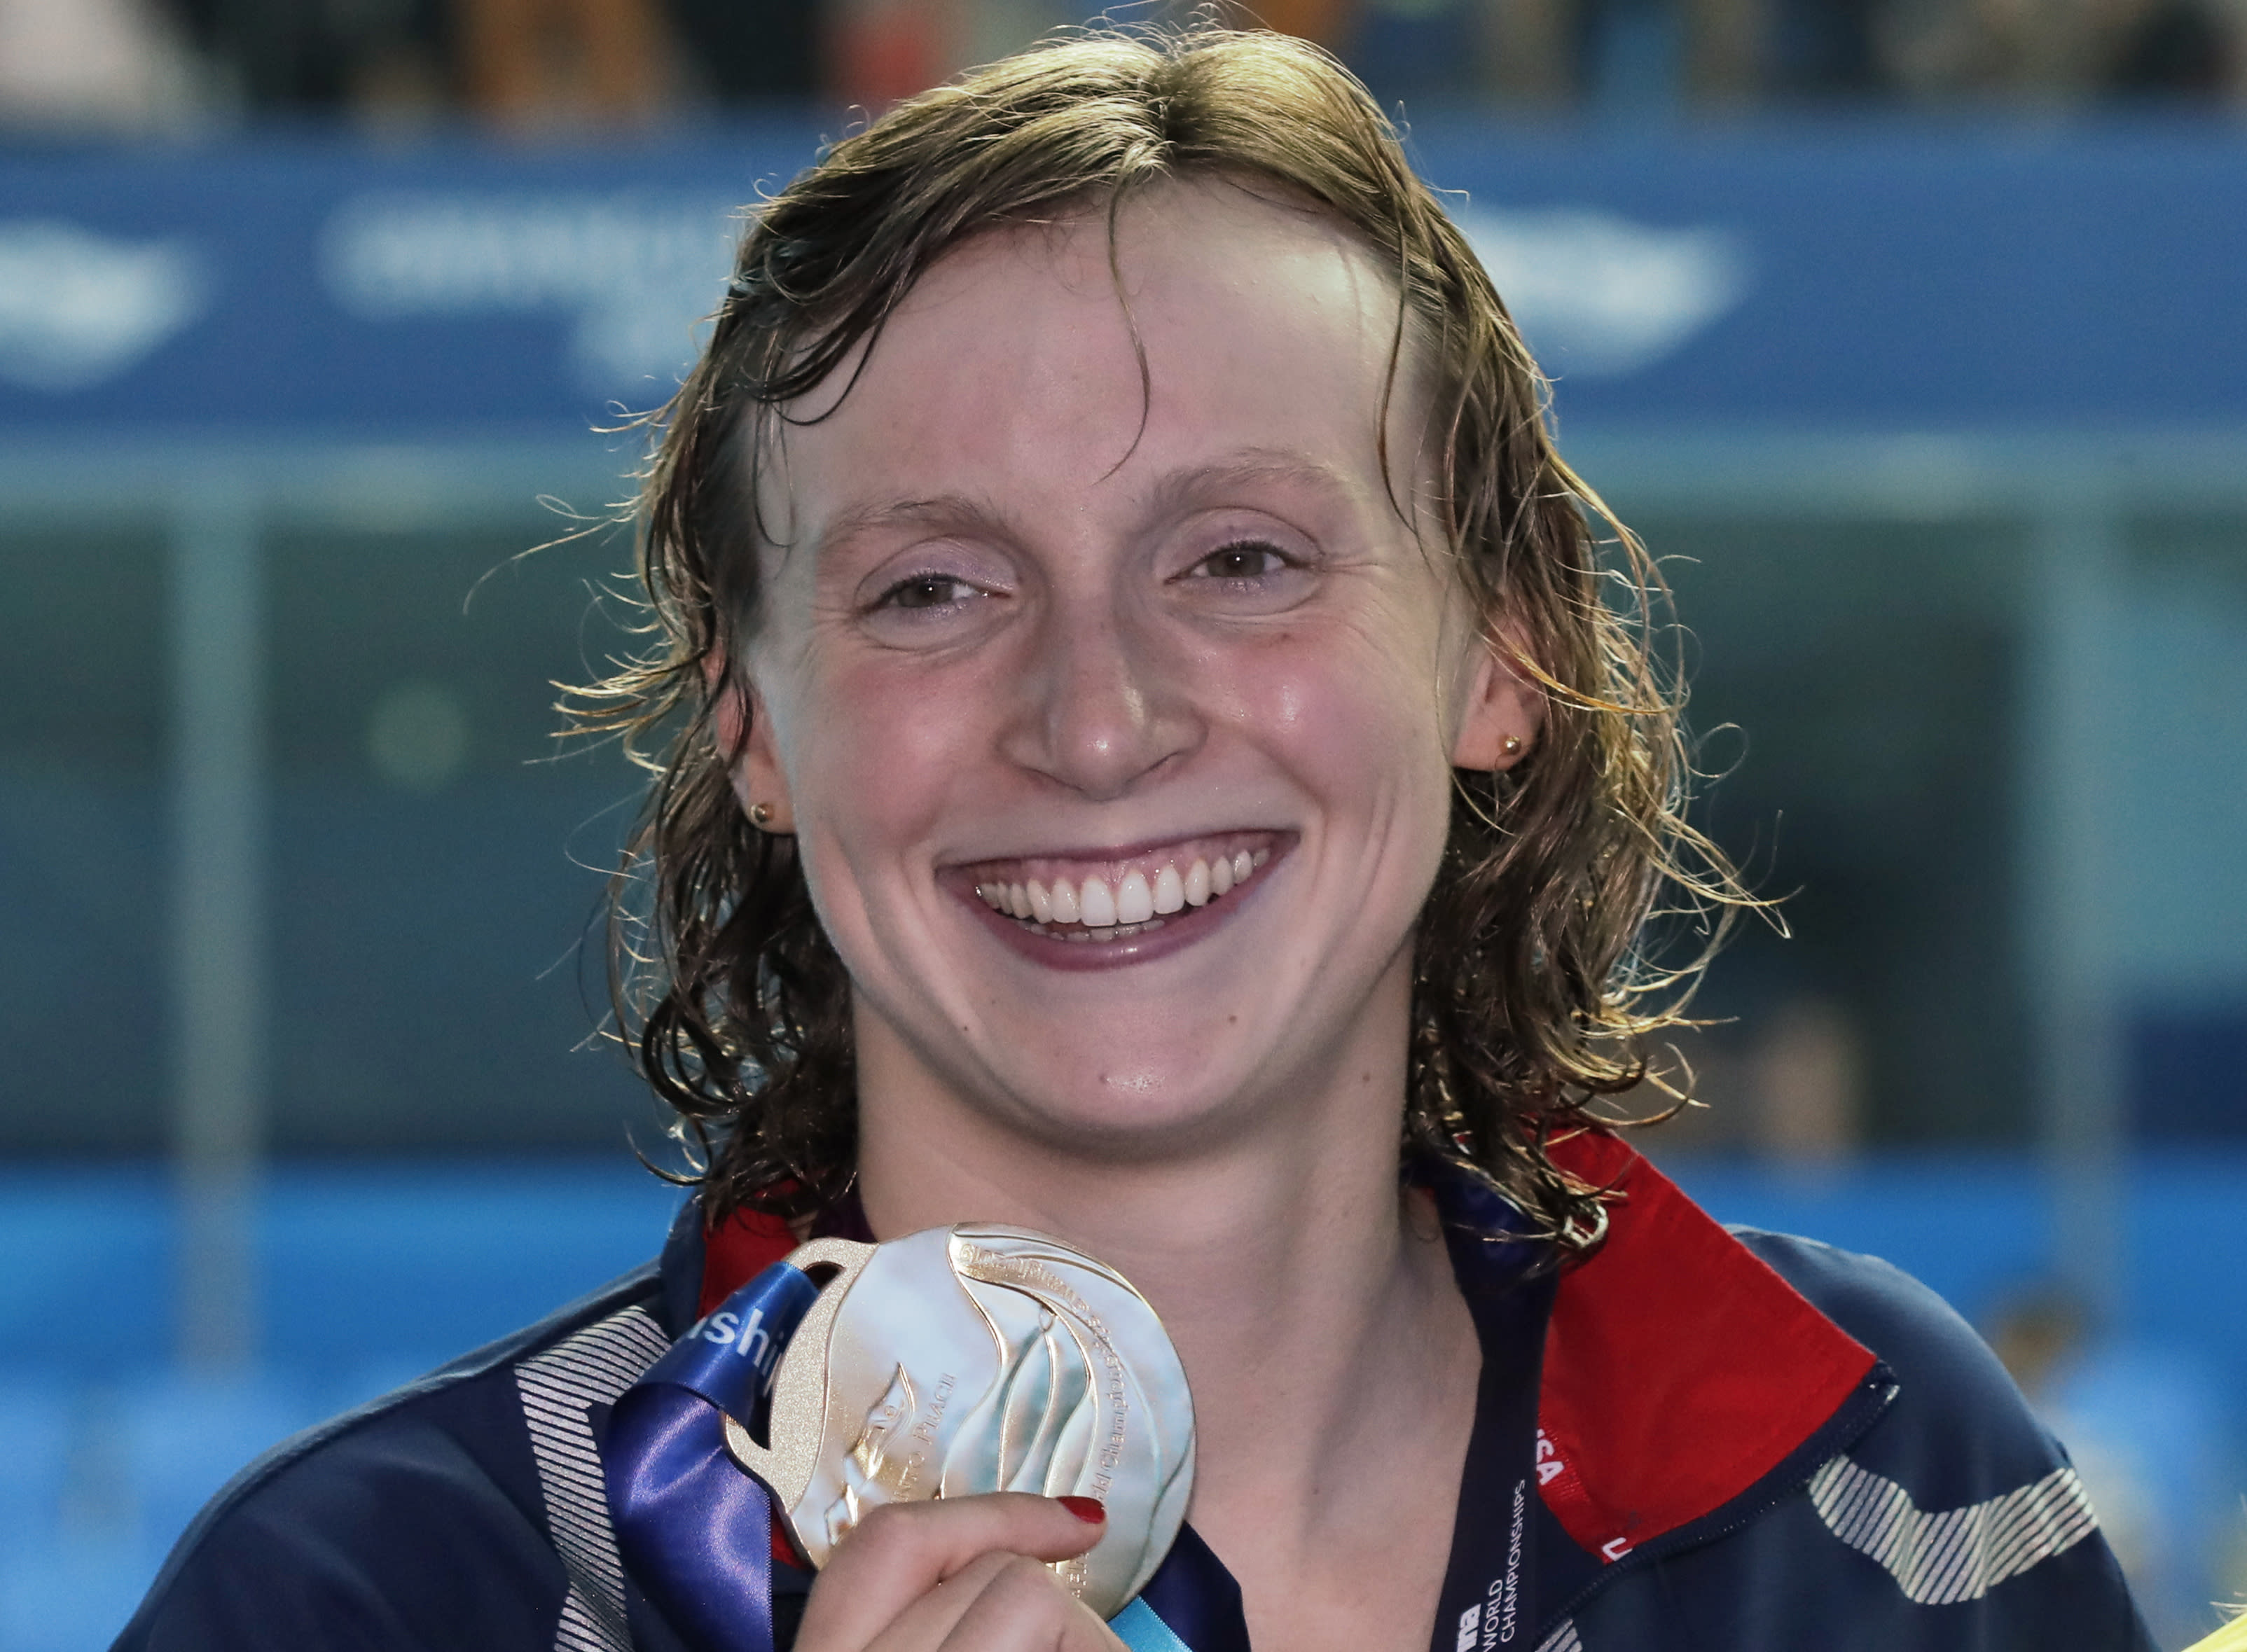 Adversity hits Katie Ledecky in way it never has before